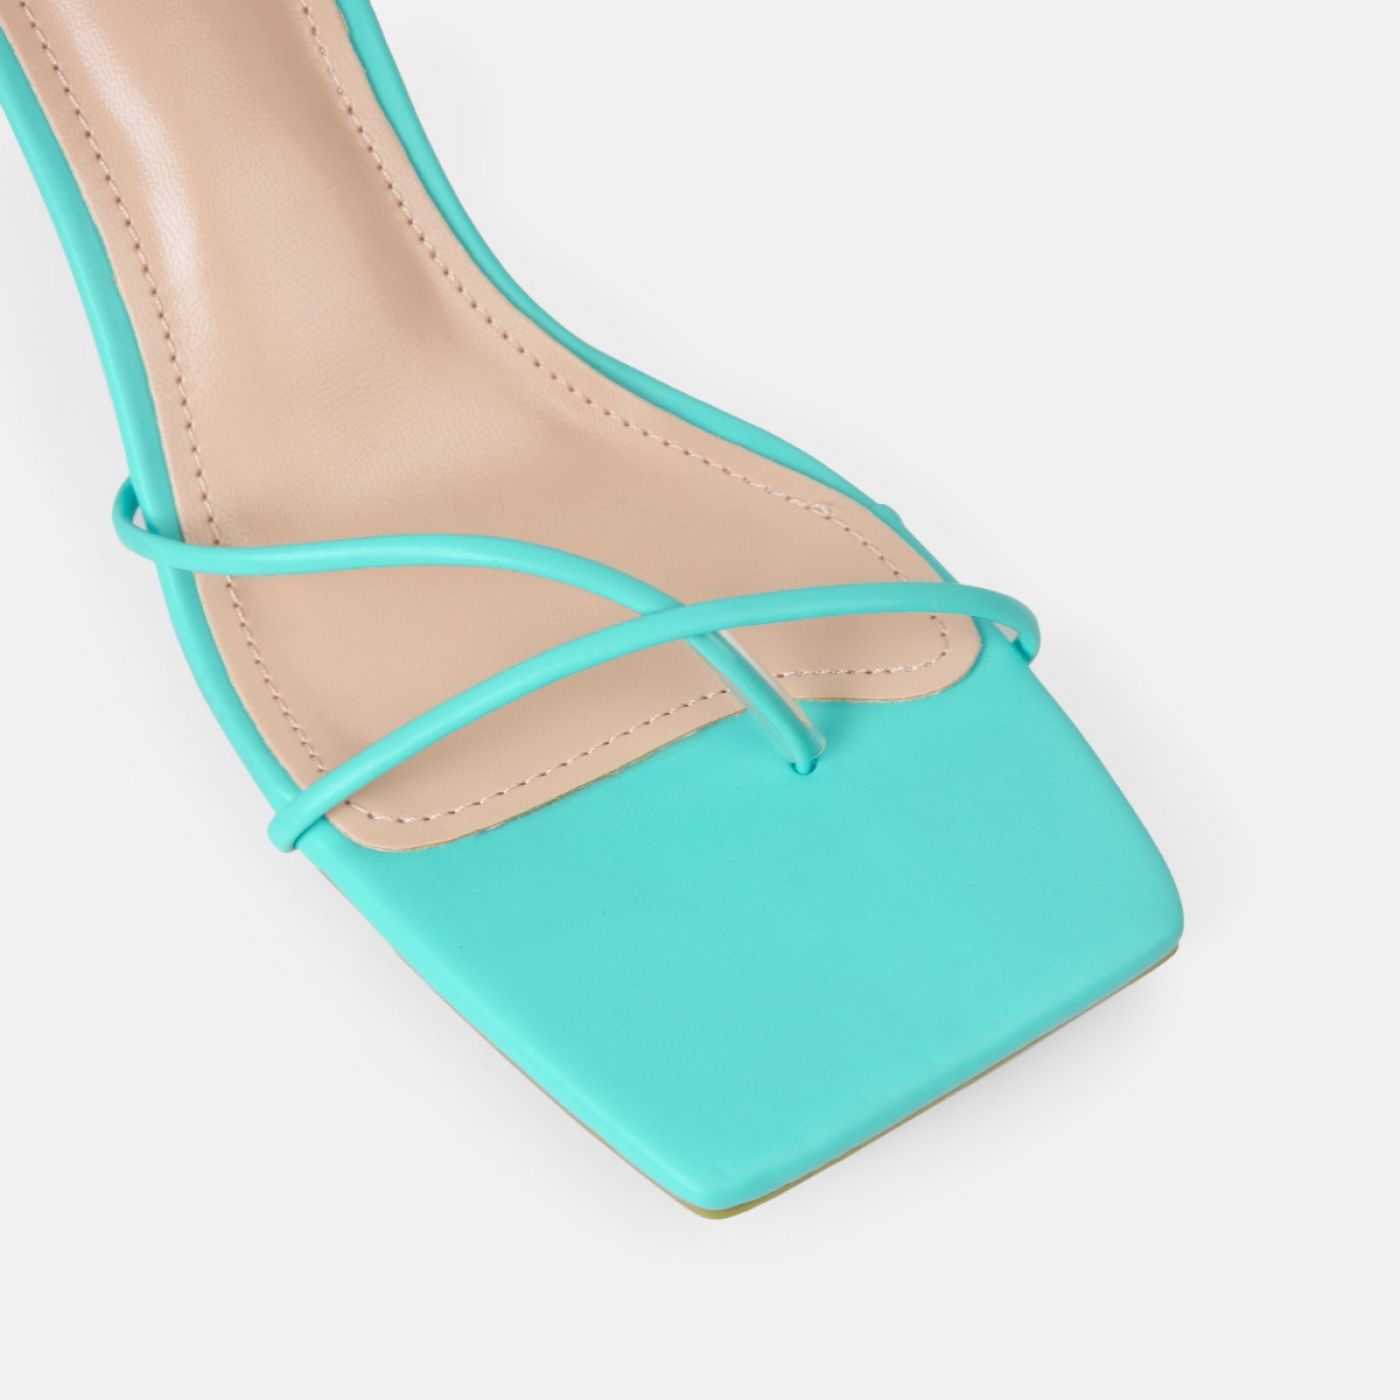 Renata Teal Strappy Lace Up Mid Heels | SIMMI London